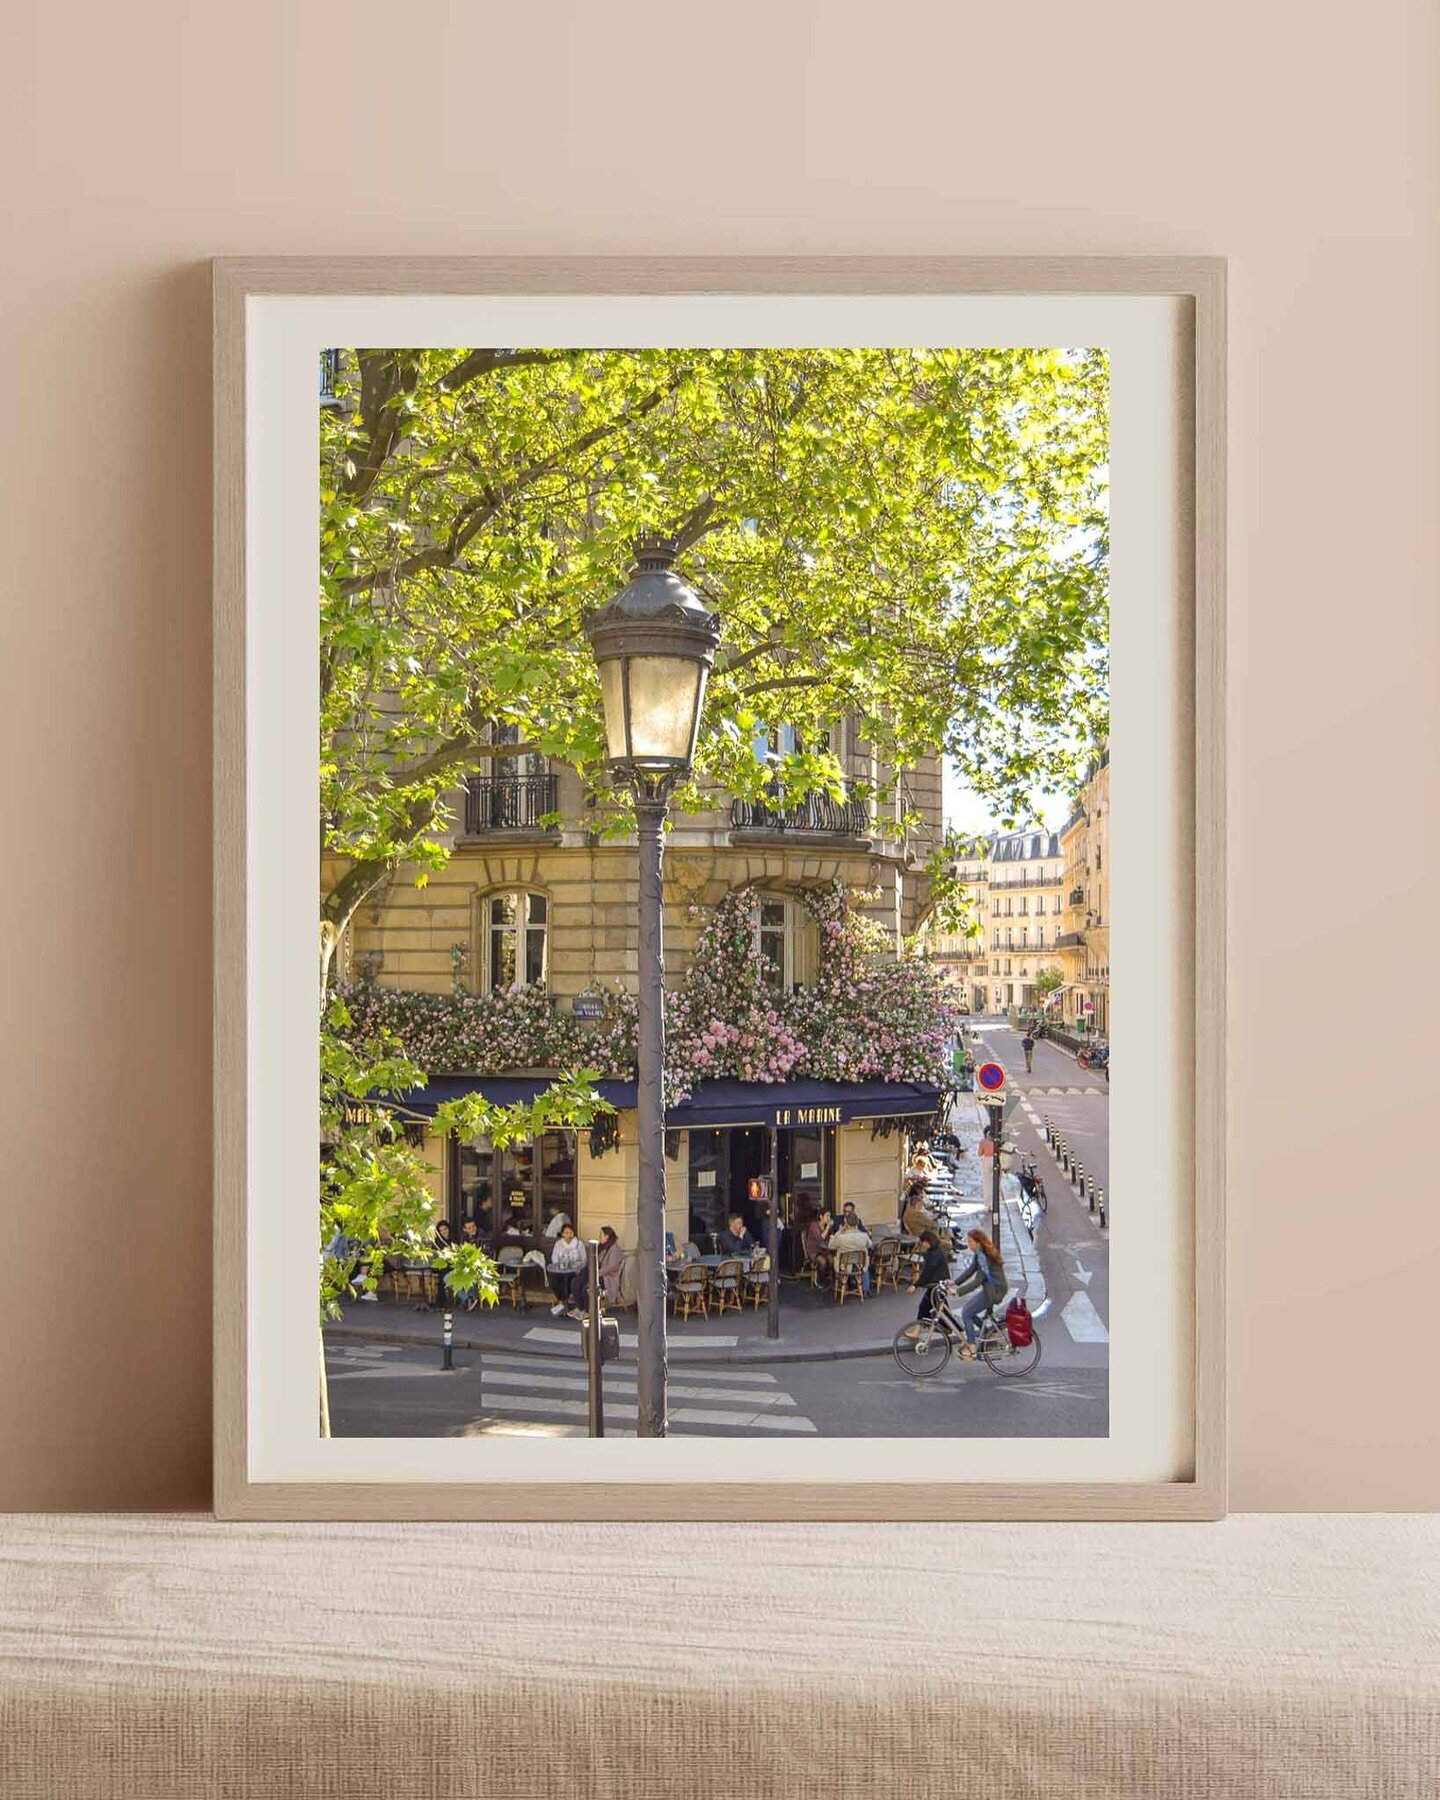 new print in my shop today! ✨ 
It is called La Marine which is the name of this pretty Parisian caf&eacute; @lamarineparis10 adjacent to the Canal Saint-Martin in the popular 10th arrondissement of Paris ⚜️

All my prints are 8x10 and are printed on 